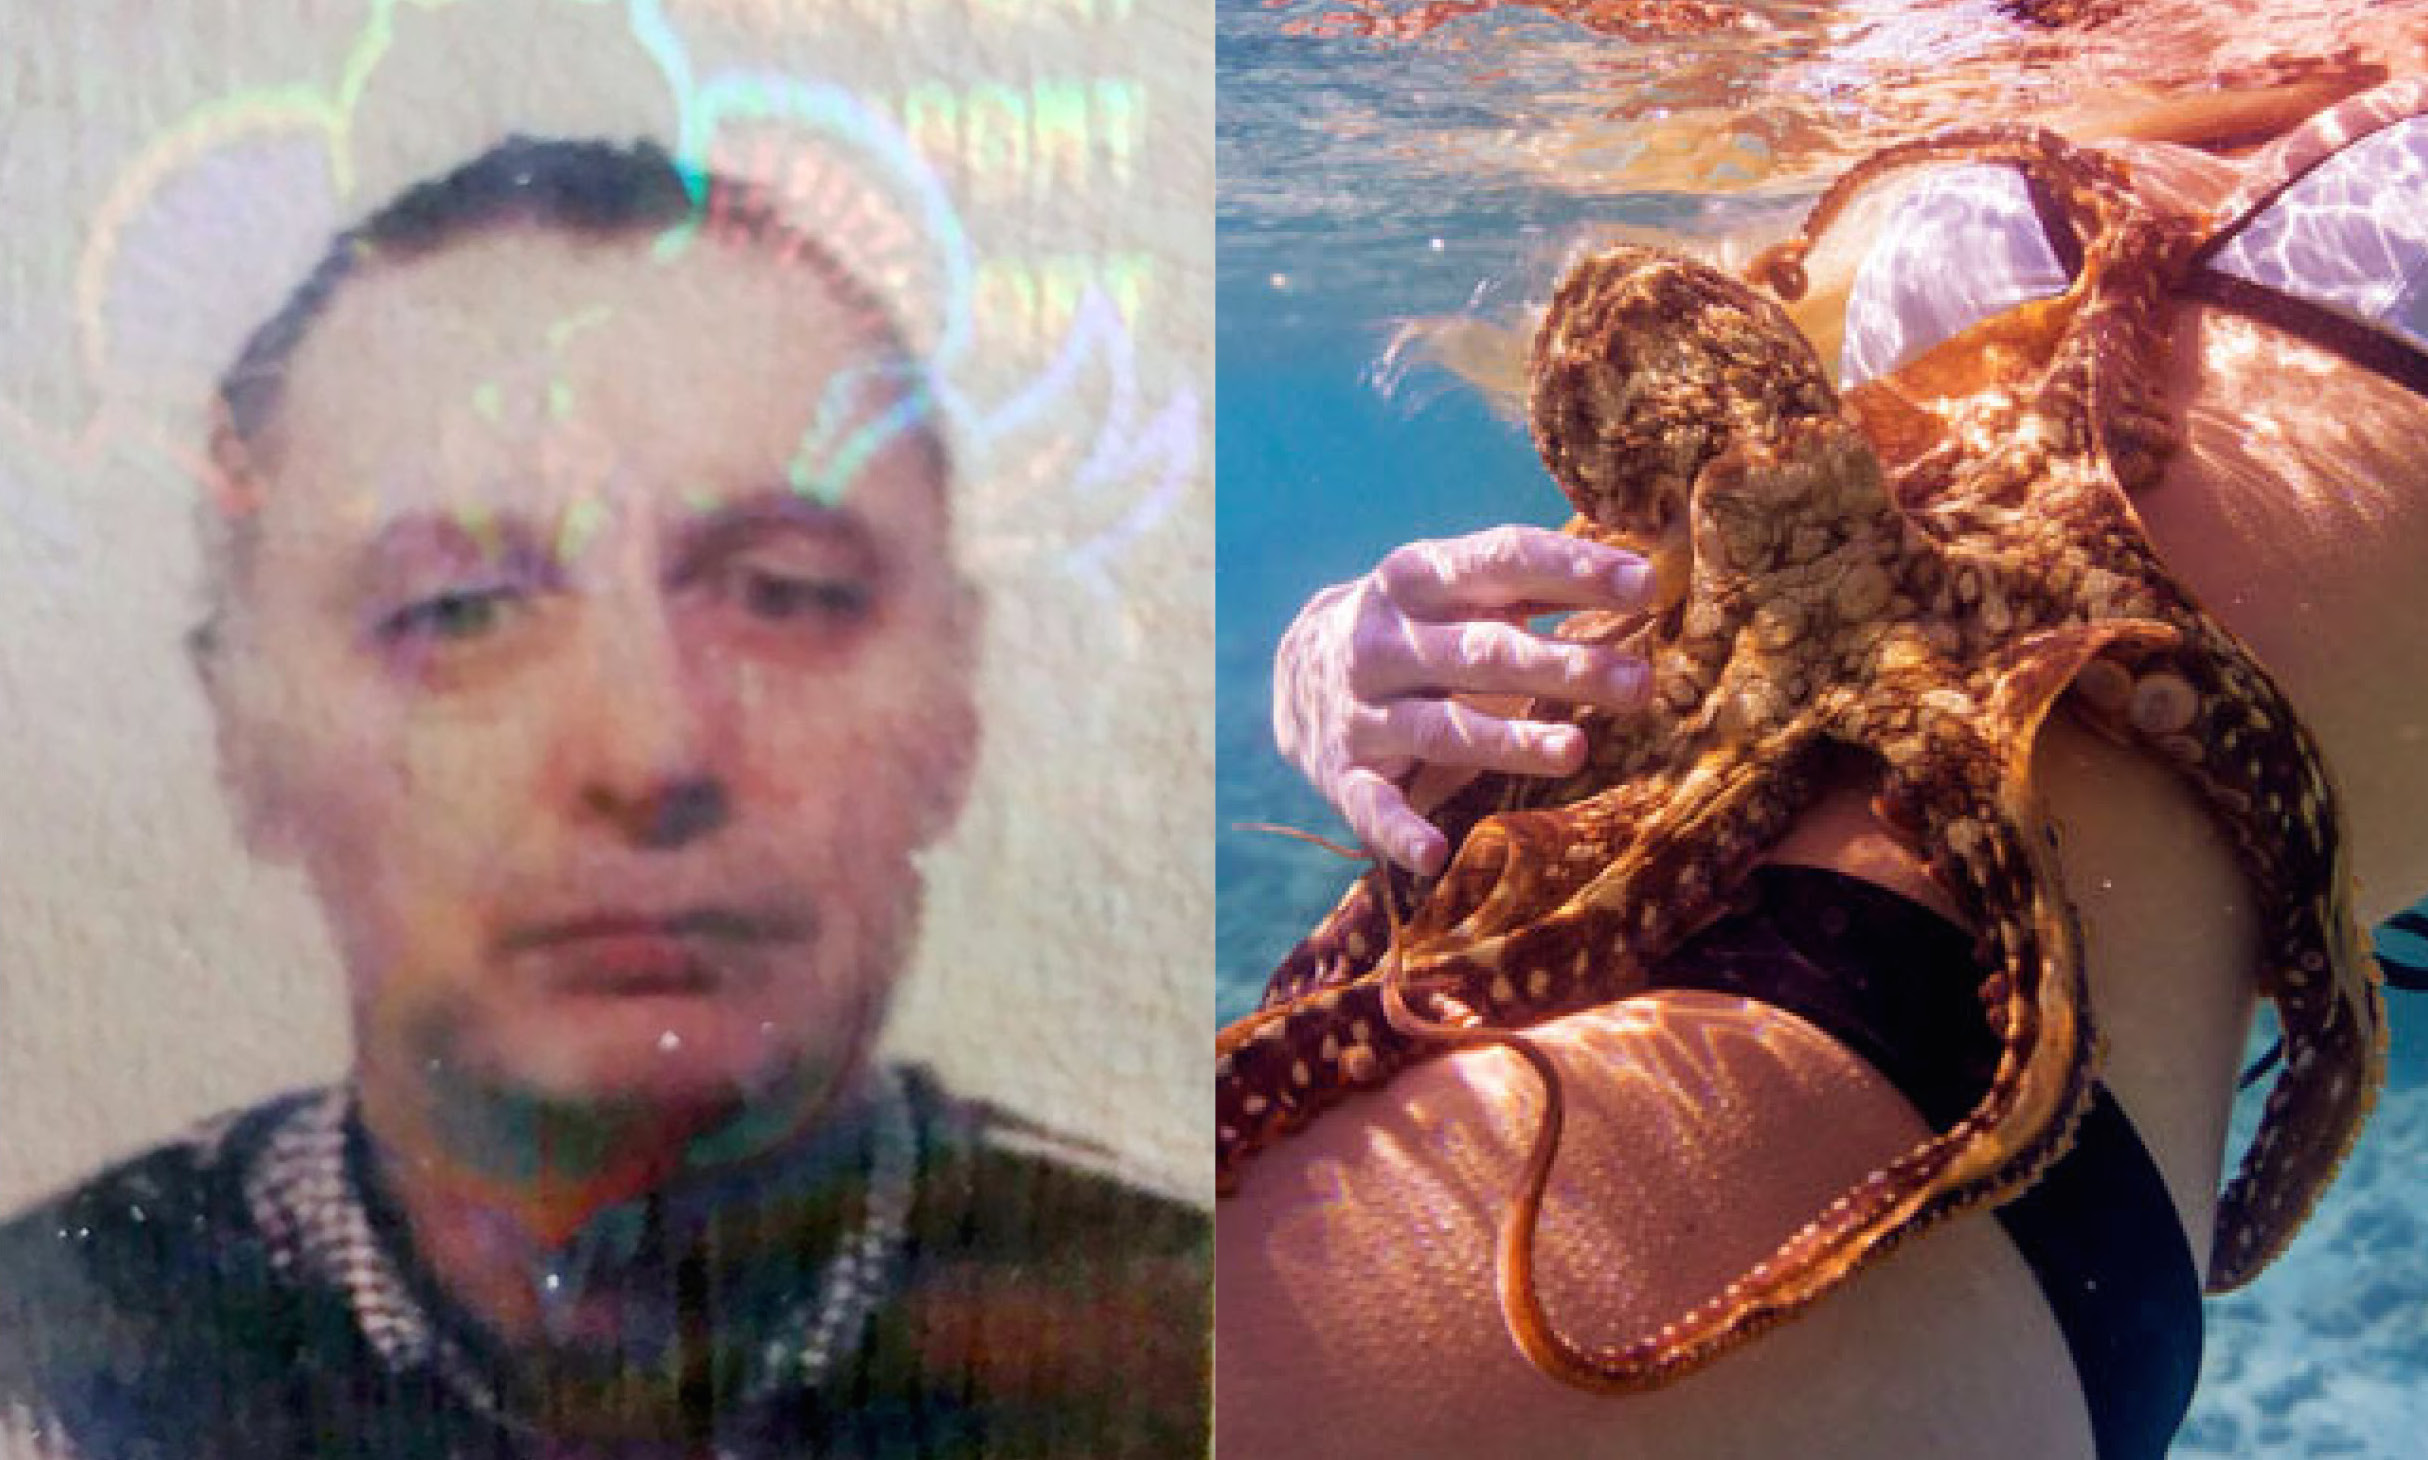 This Man Caught With Extreme Octopus And Child Porn Has Been ...